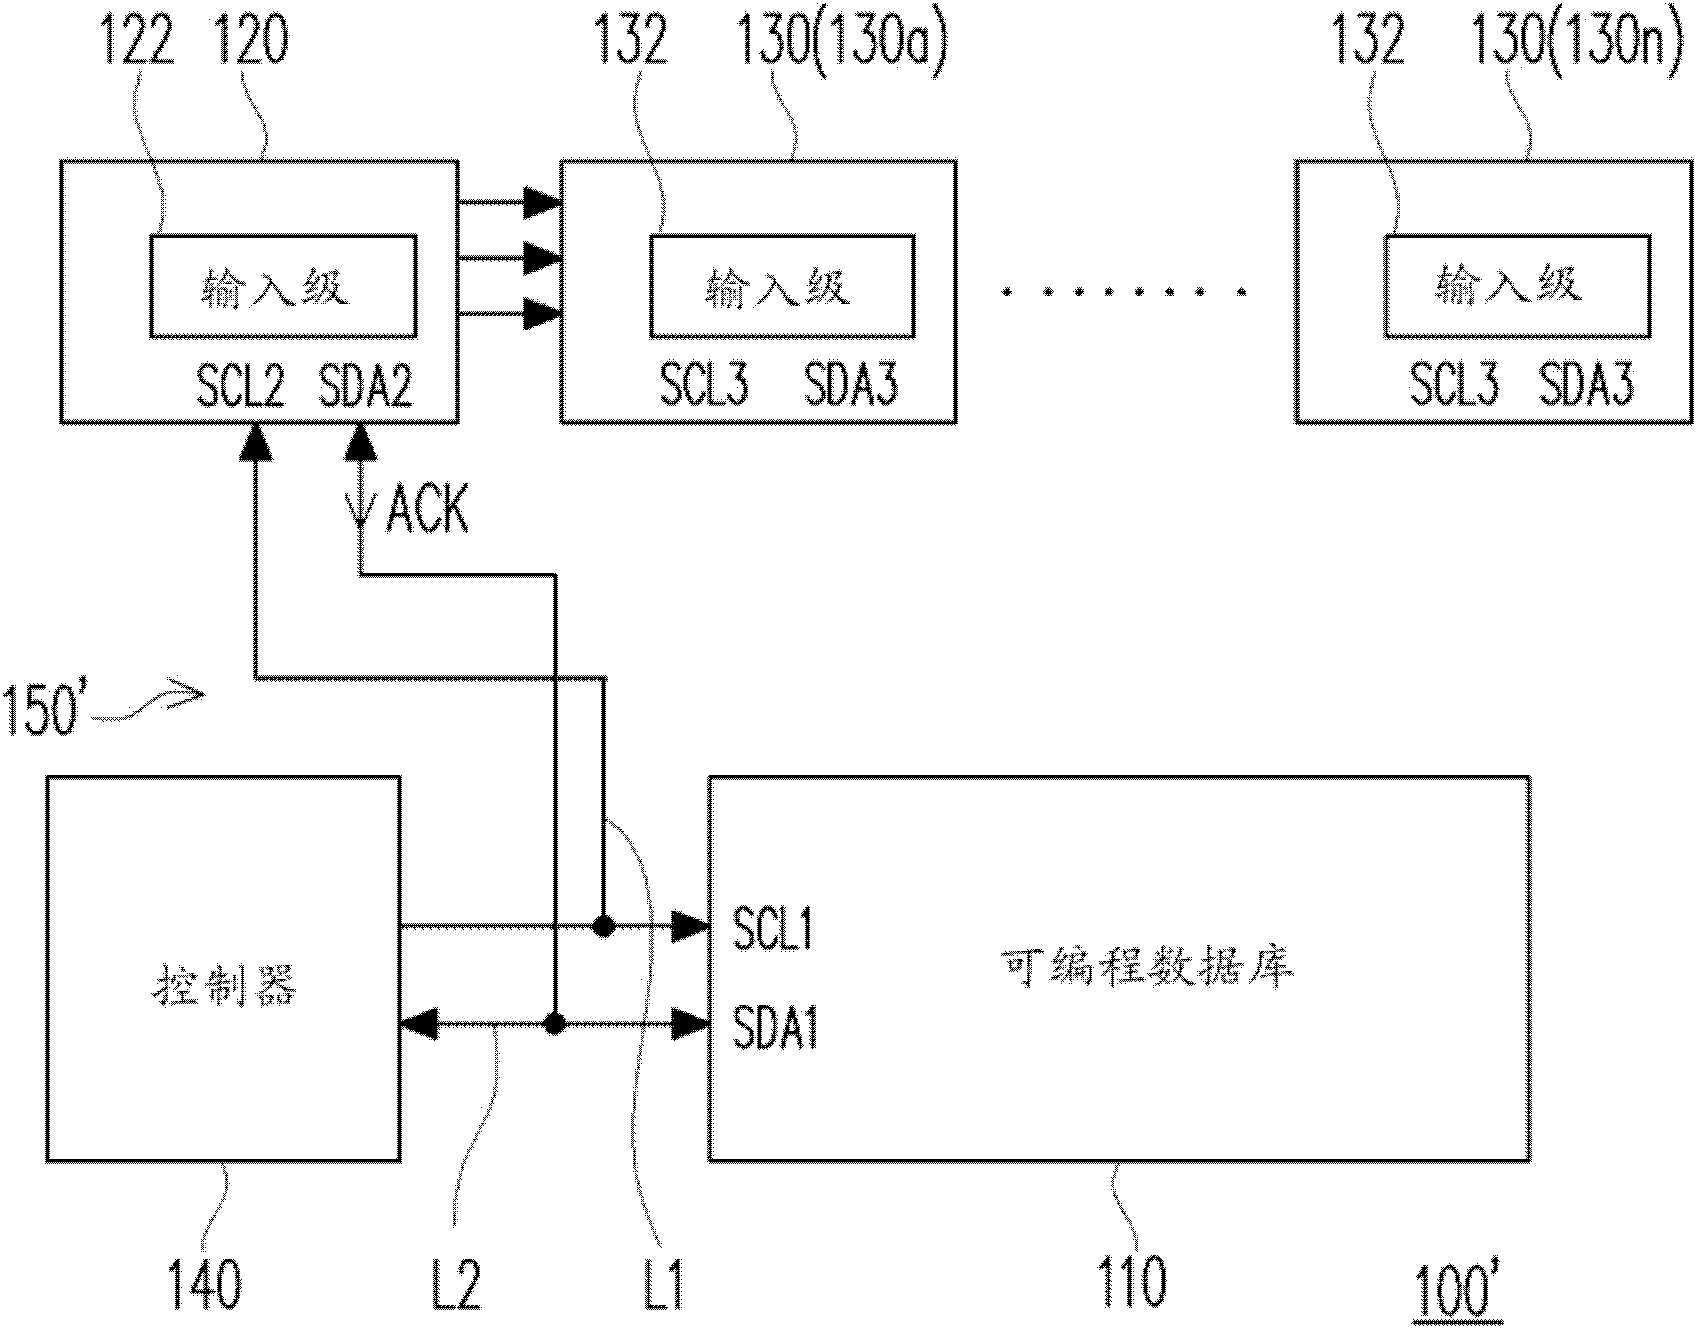 Control system of serial interface